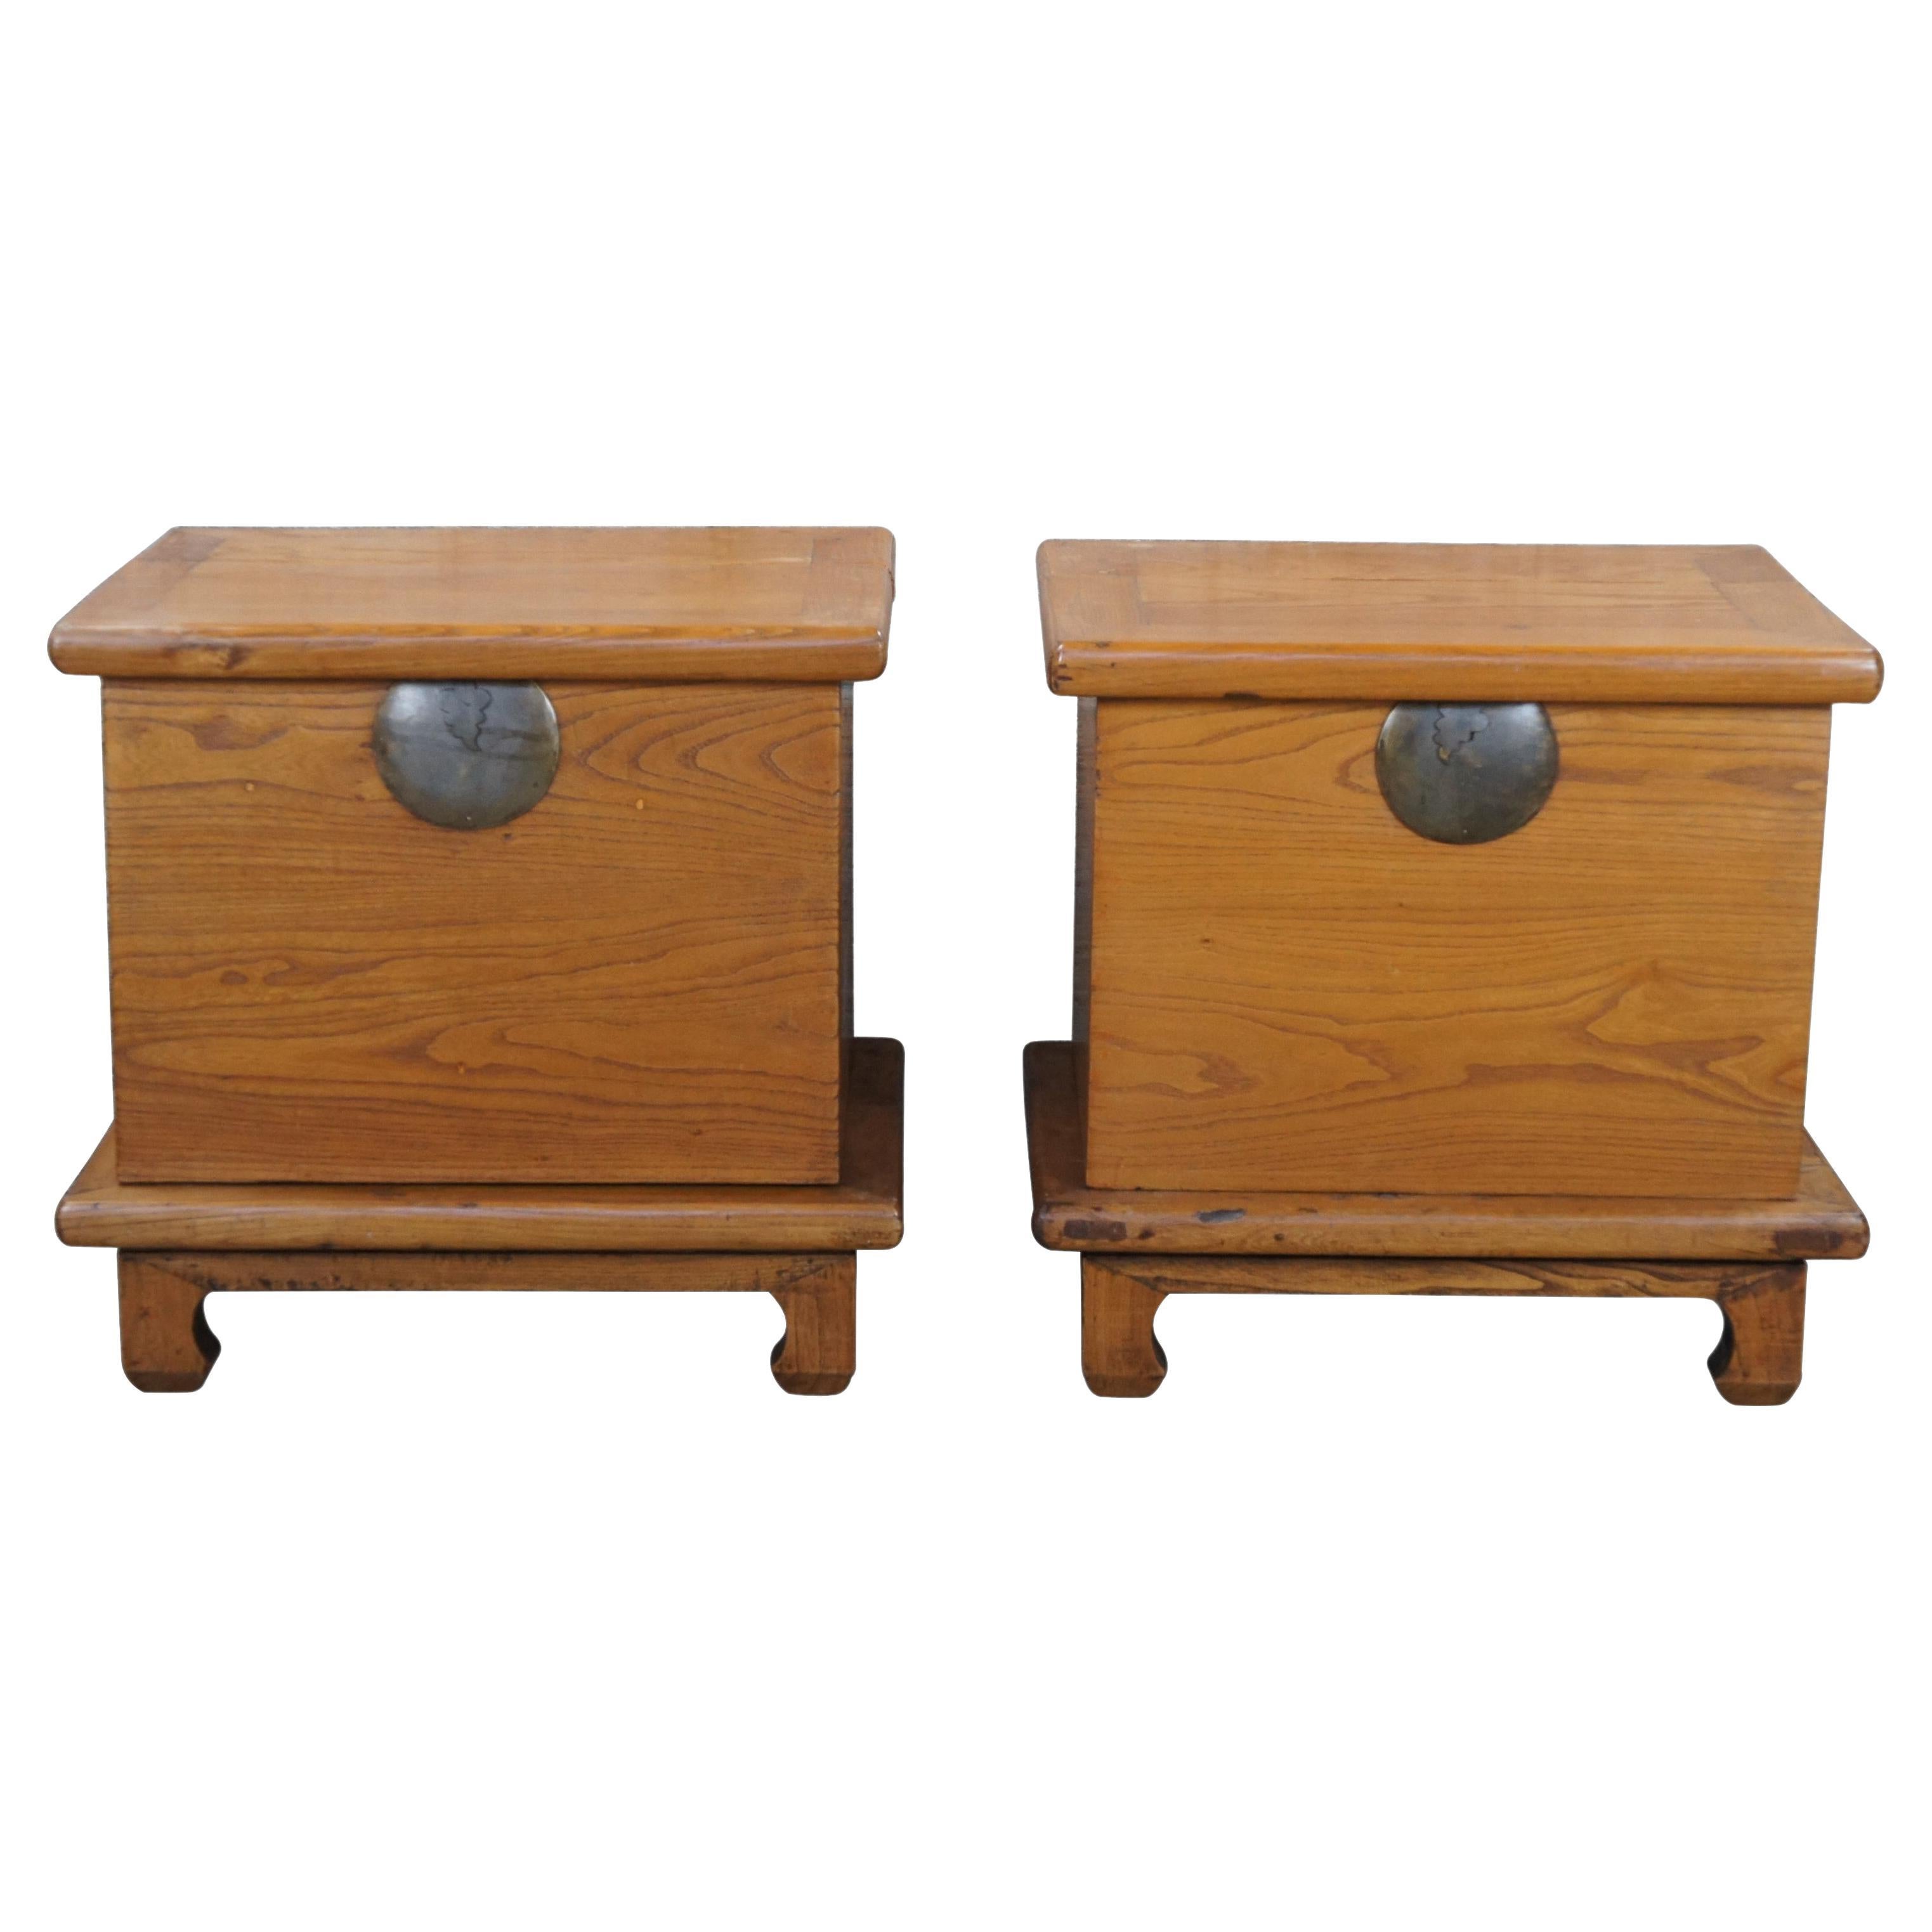 2 Antique 18th Century Qing Dynasty Shanxi Elm Wood Storage Chests Trunks Pair For Sale